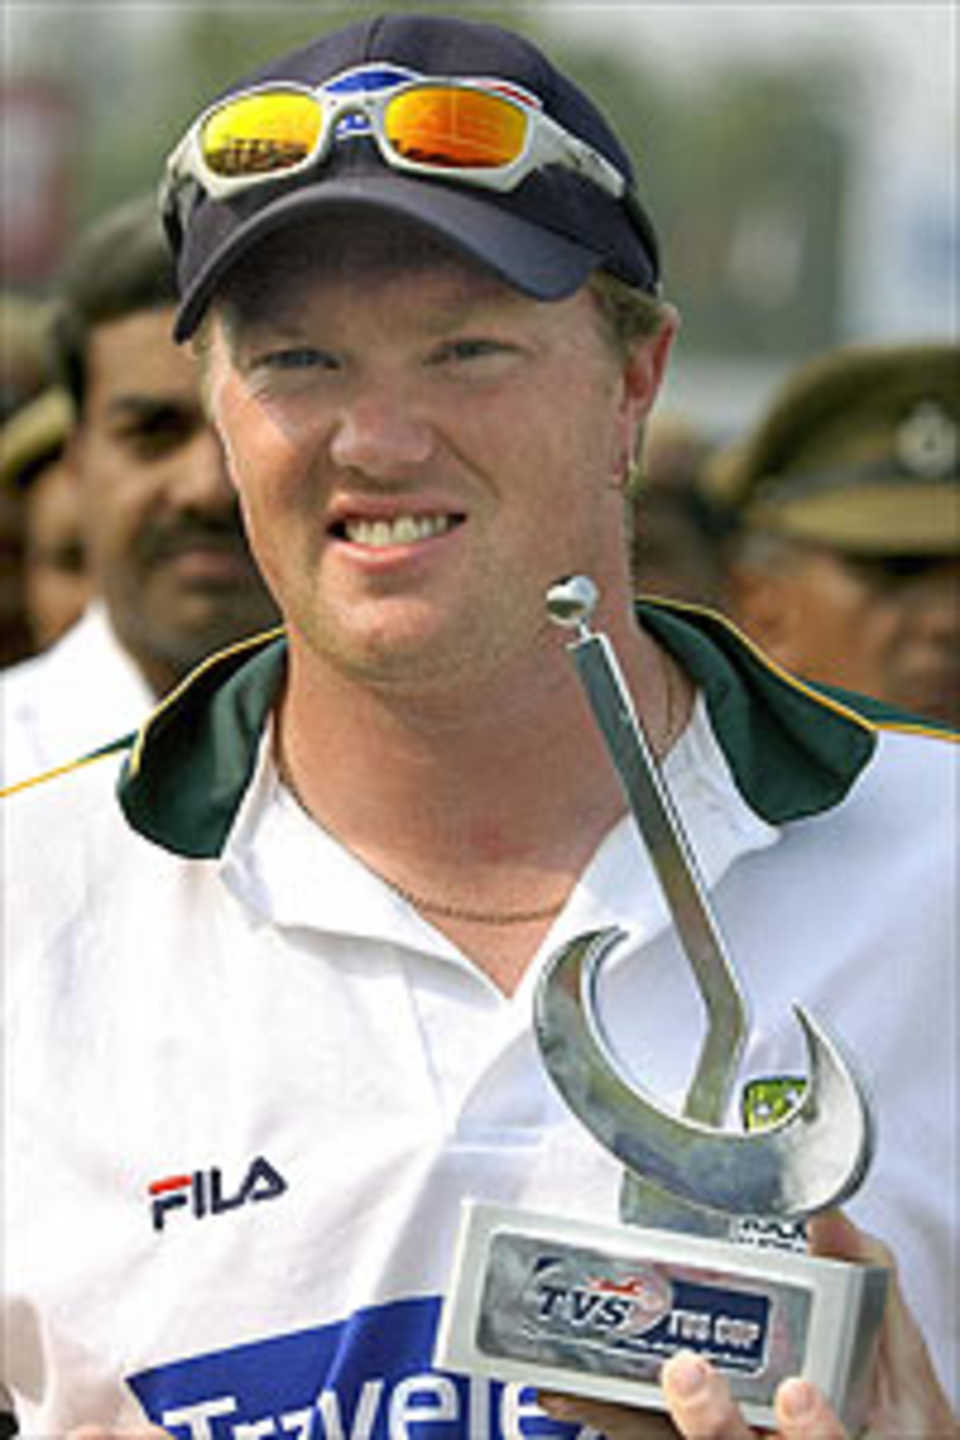 Australian bowler Brad Williams holds his man-of-the-match trophy, 29 October 2003, at the end of the One day International match between Australia and New Zealand in Faridabad. Australia's second-string pacemen Nathan Bracken and Brad Williams wrecked New Zealand to set up a spectacular eight-wicket win for the cricket world champions in the tri-series match between Australia, New Zealand and India. Williams took four wickets.